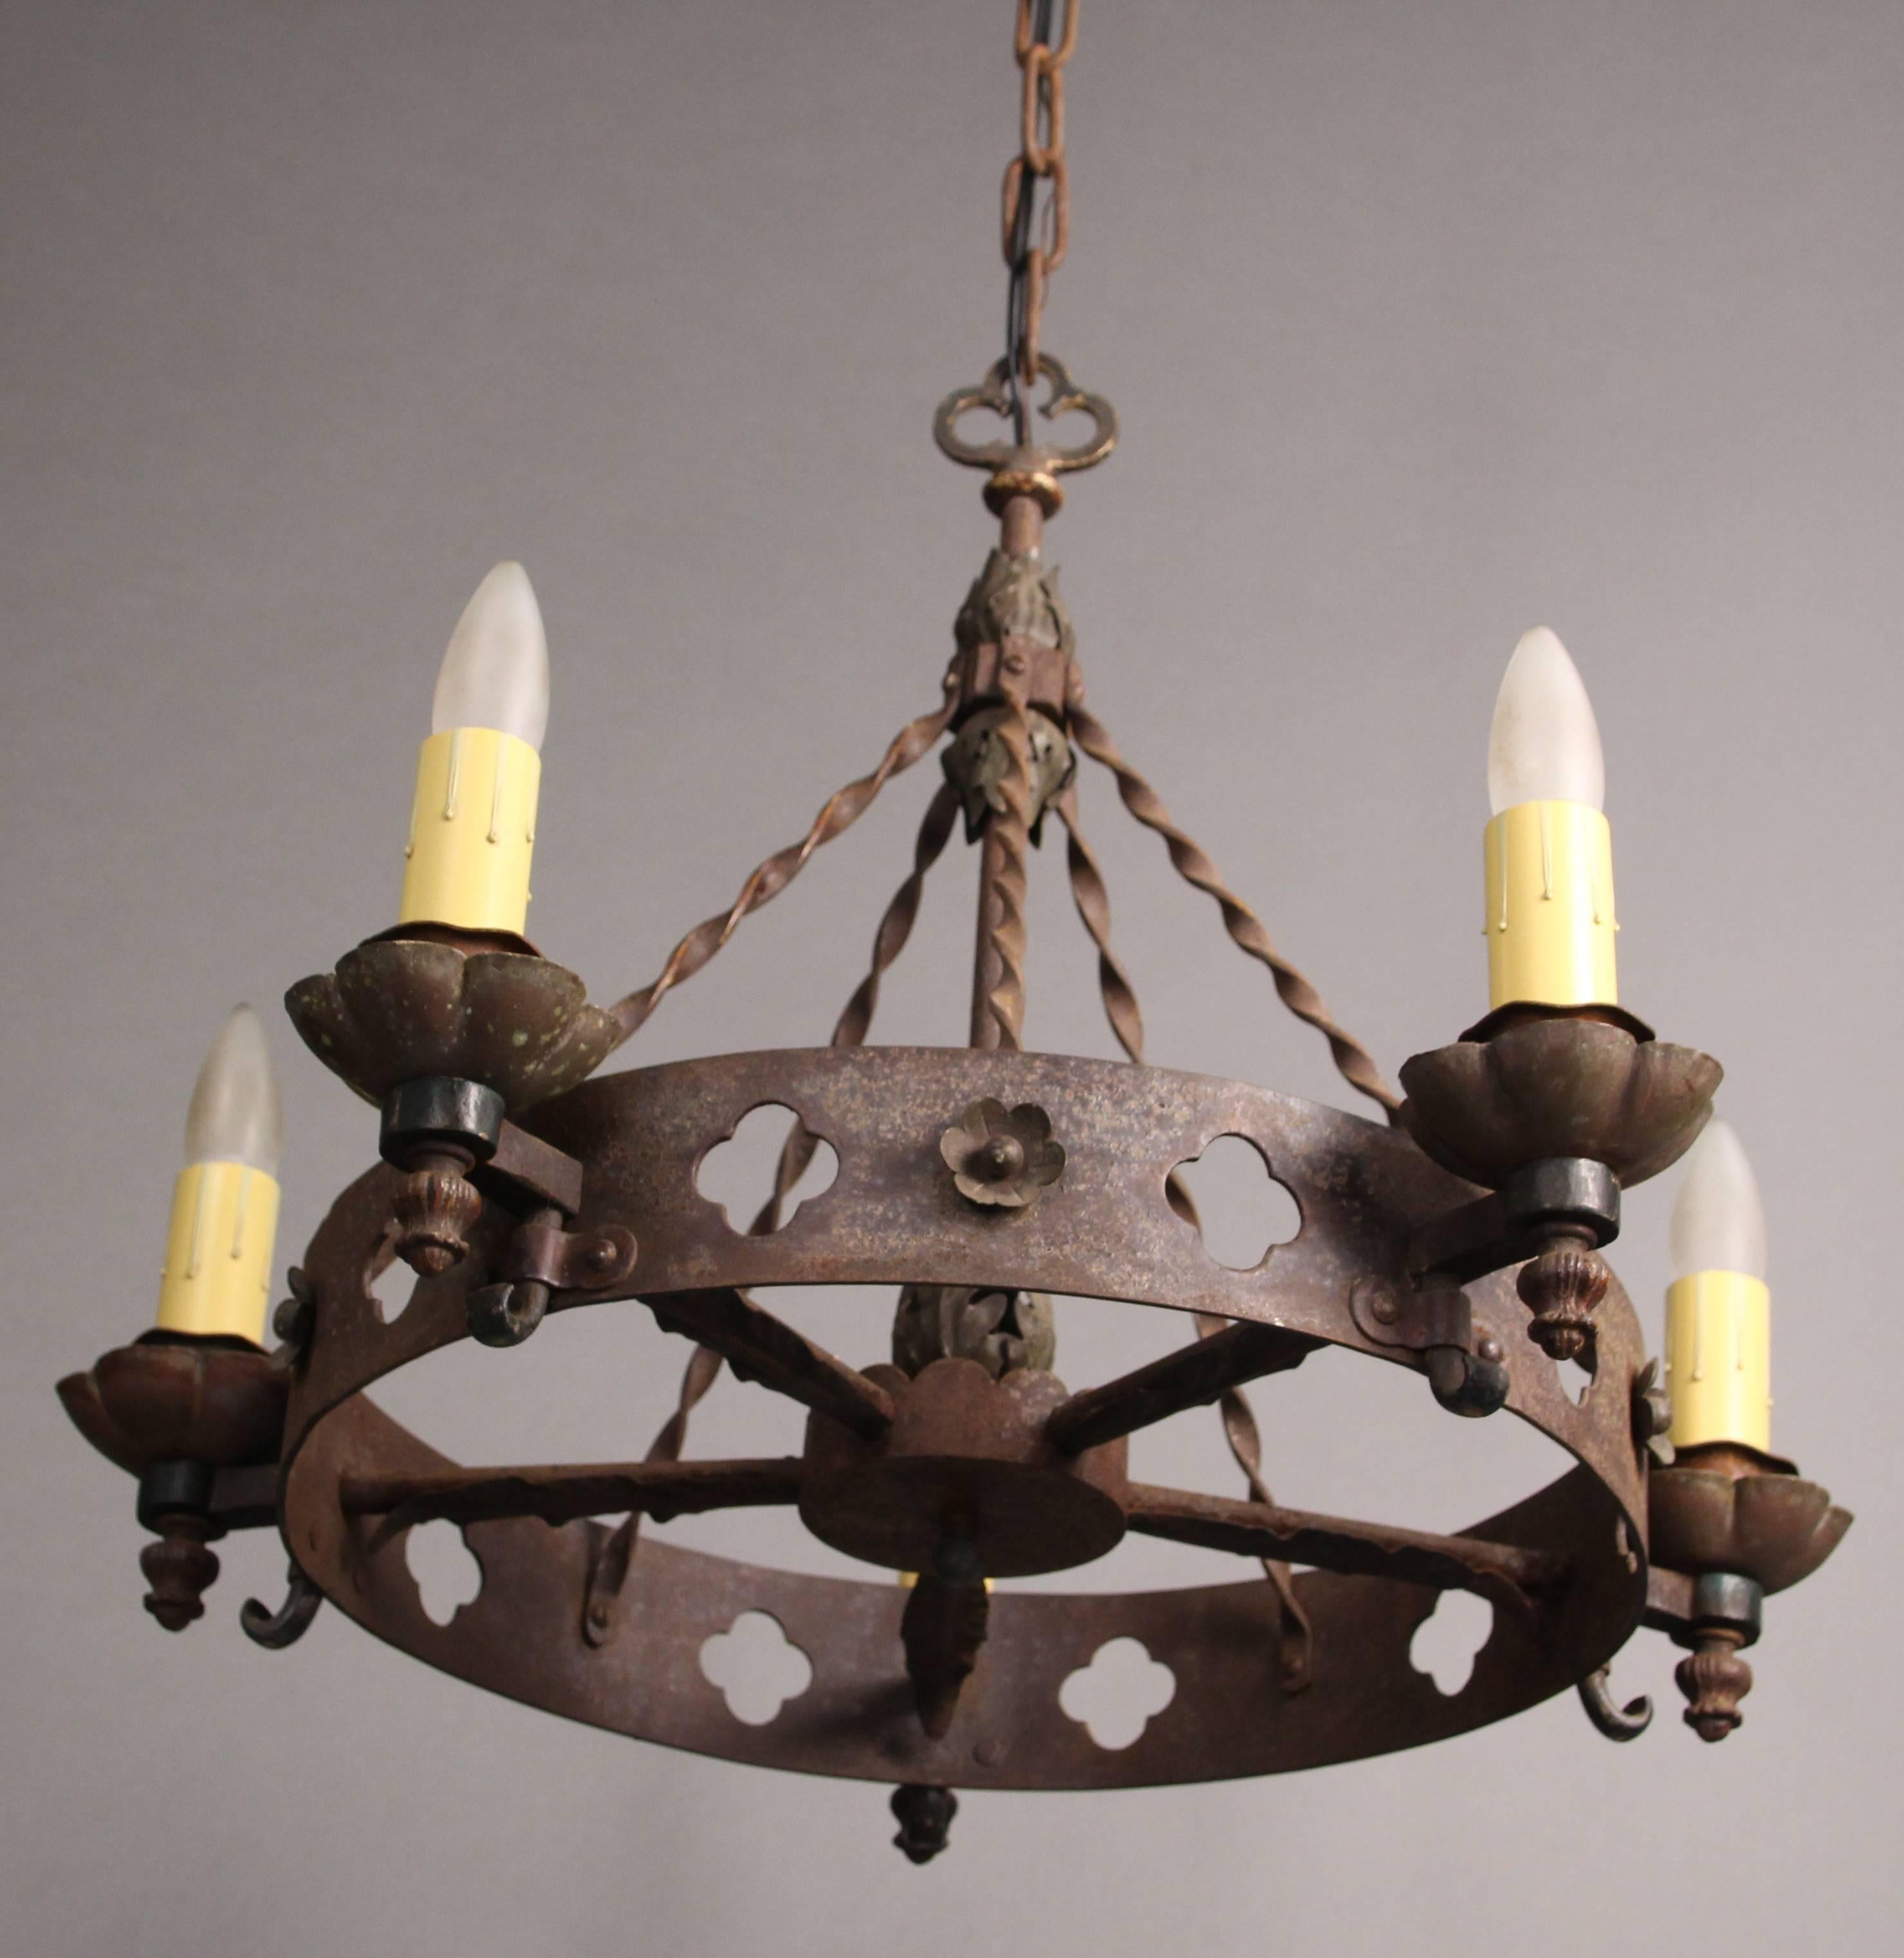 Spanish Colonial 1920s, Iron Spanish Revival Chandelier